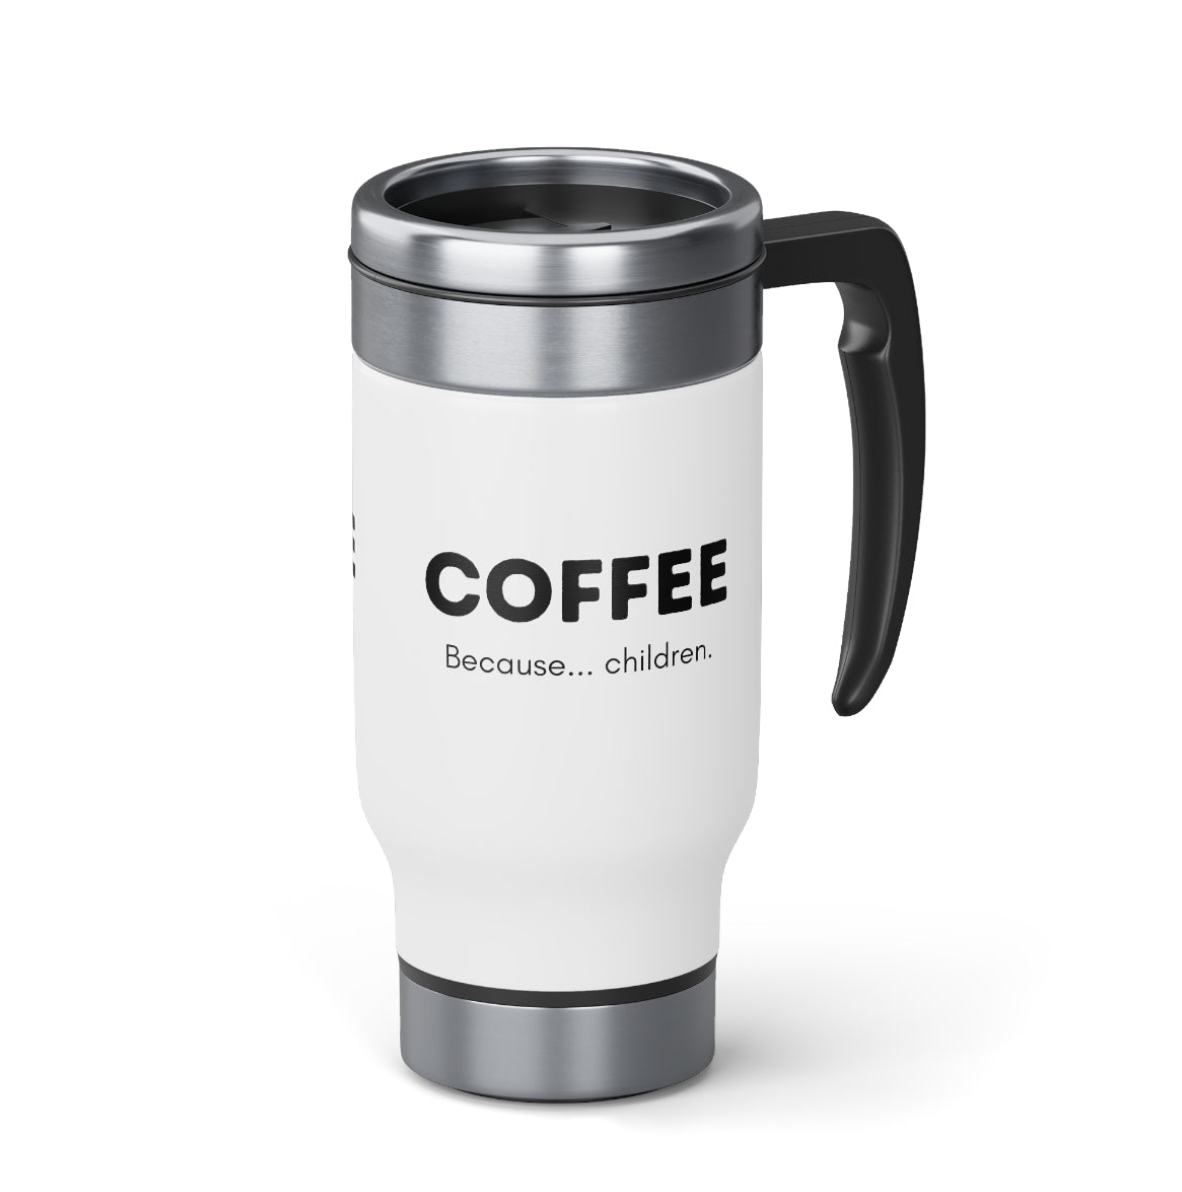 Coffee, Because... Children | Funny Mug for Parents | Stainless Steel Travel Mug with Handle, 14oz